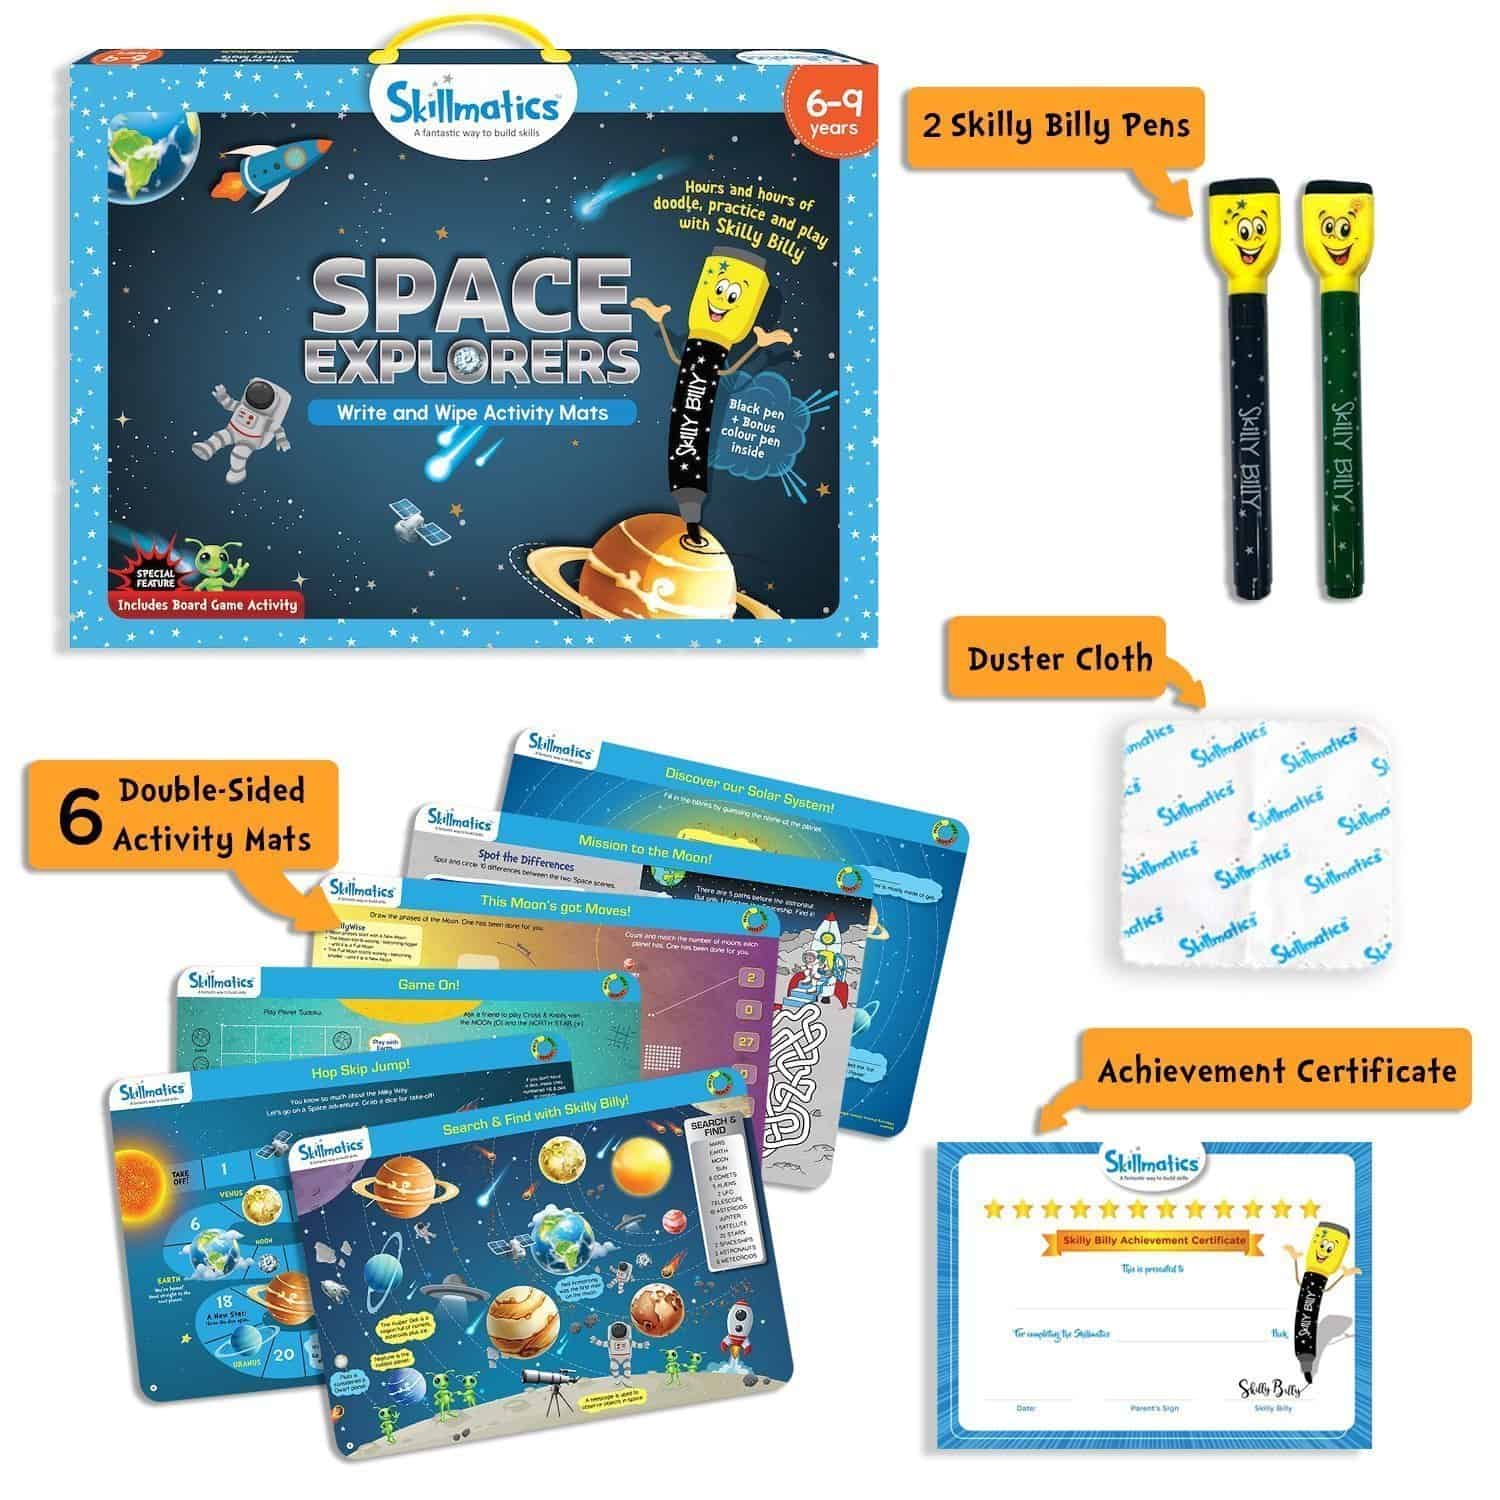 Skillmatics Space Explorers - Teach Kids About Space - Write & Wipe - SOLONY